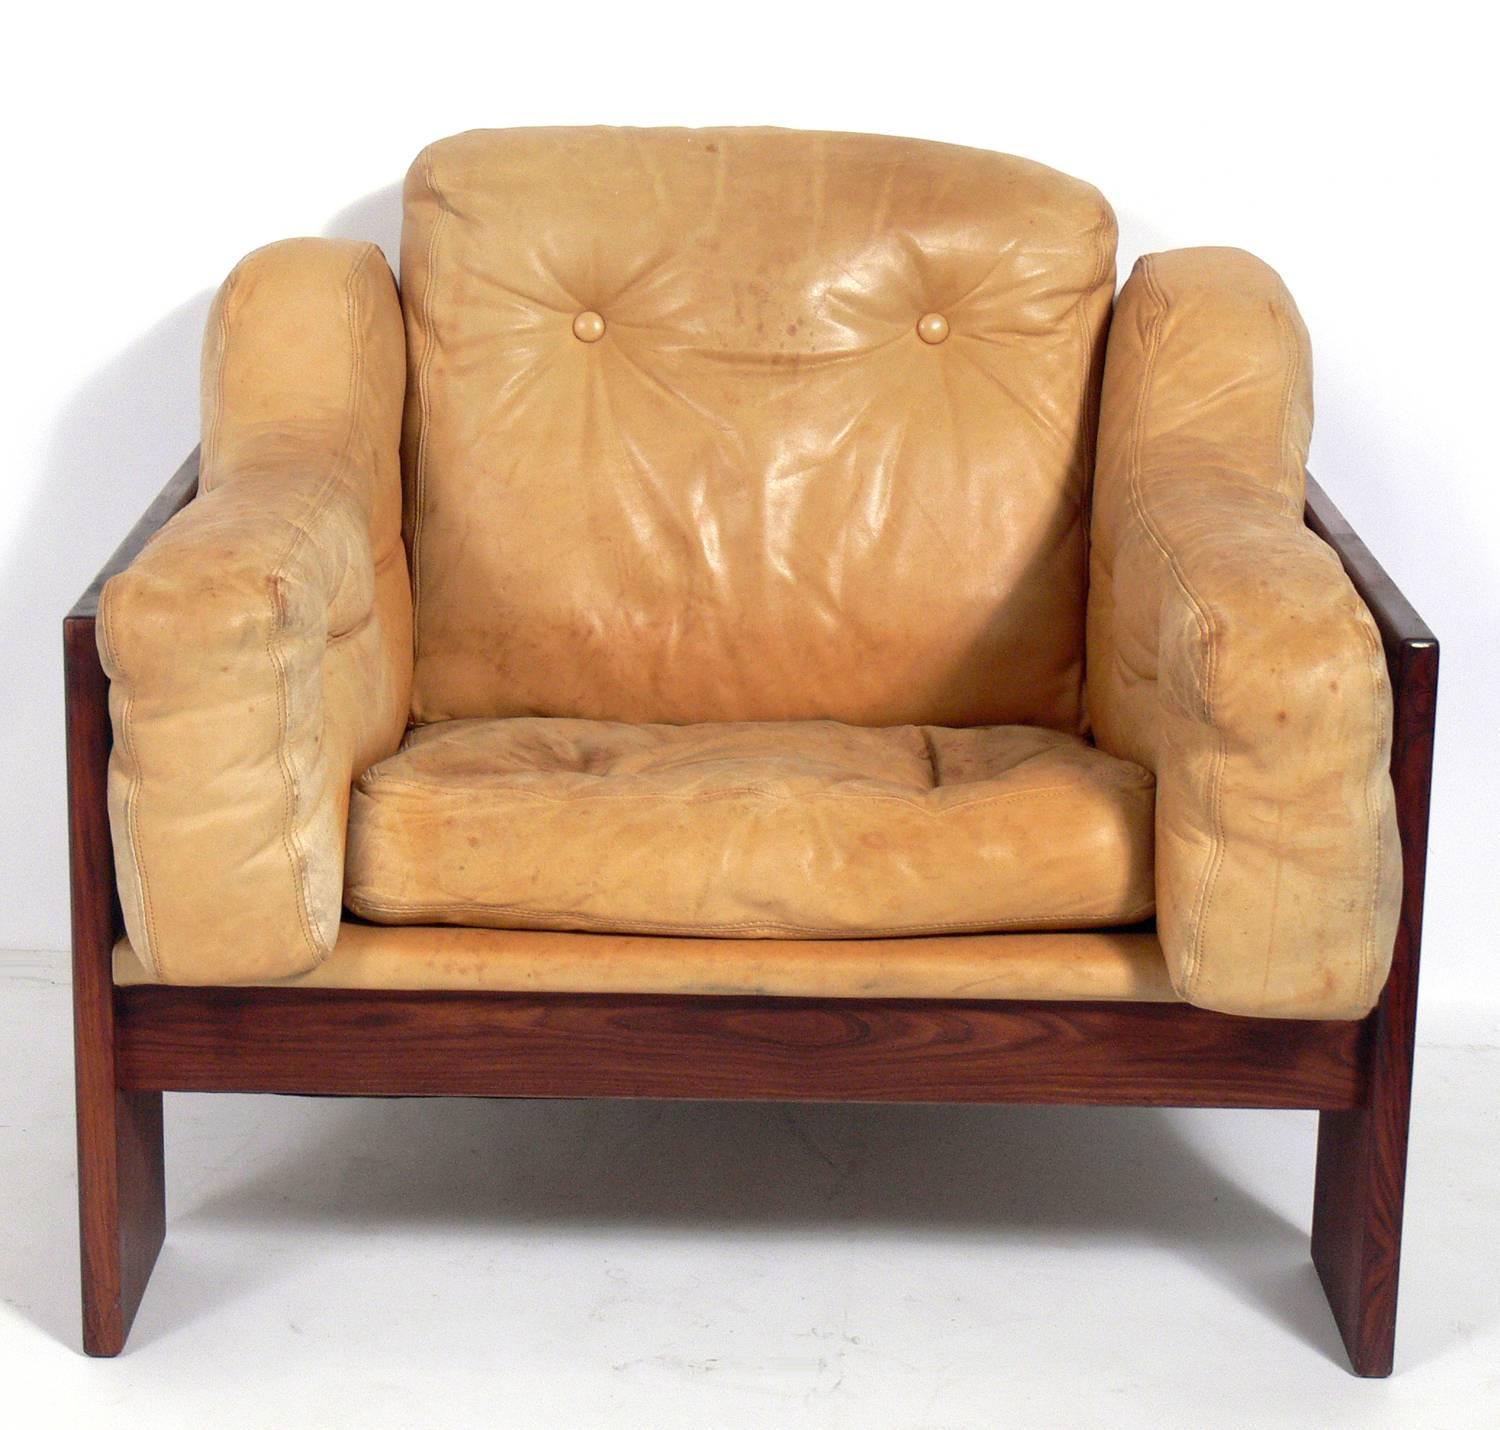 Mid-Century Modern Sculptural Danish Modern Rosewood and Leather Lounge Chair